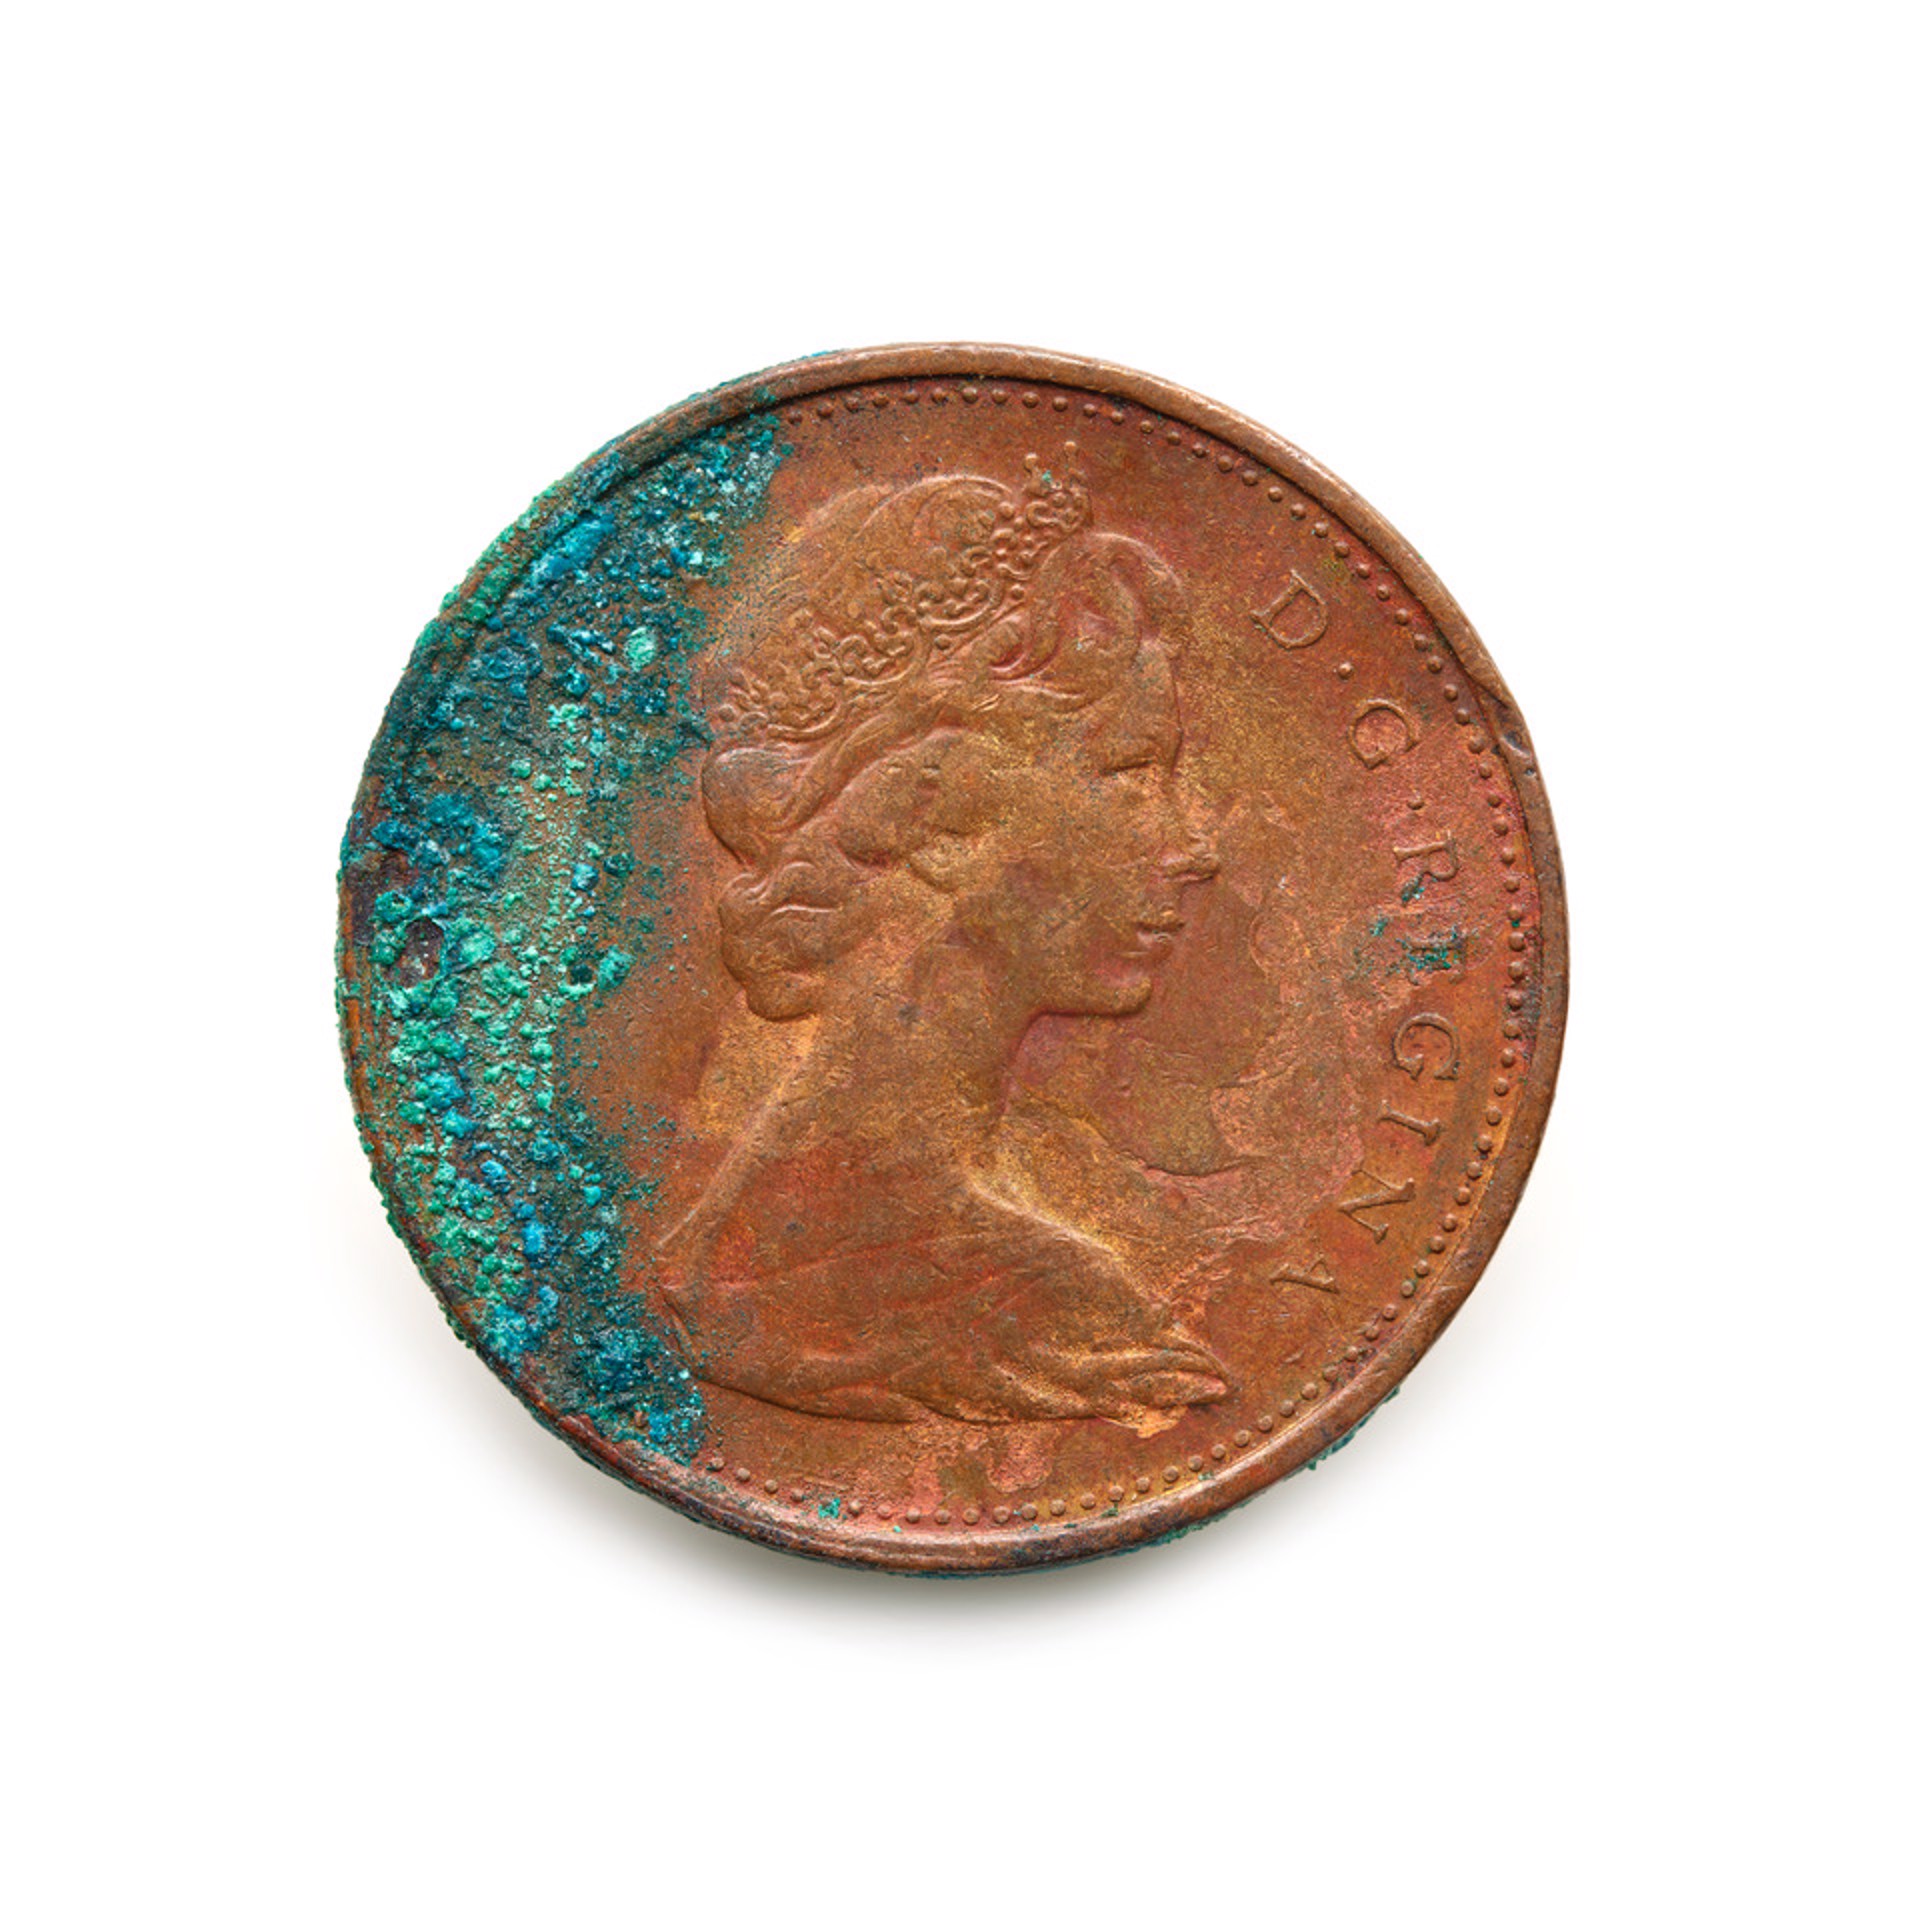 Queen's Head Penny by Peter Andrew Lusztyk | Collectibles